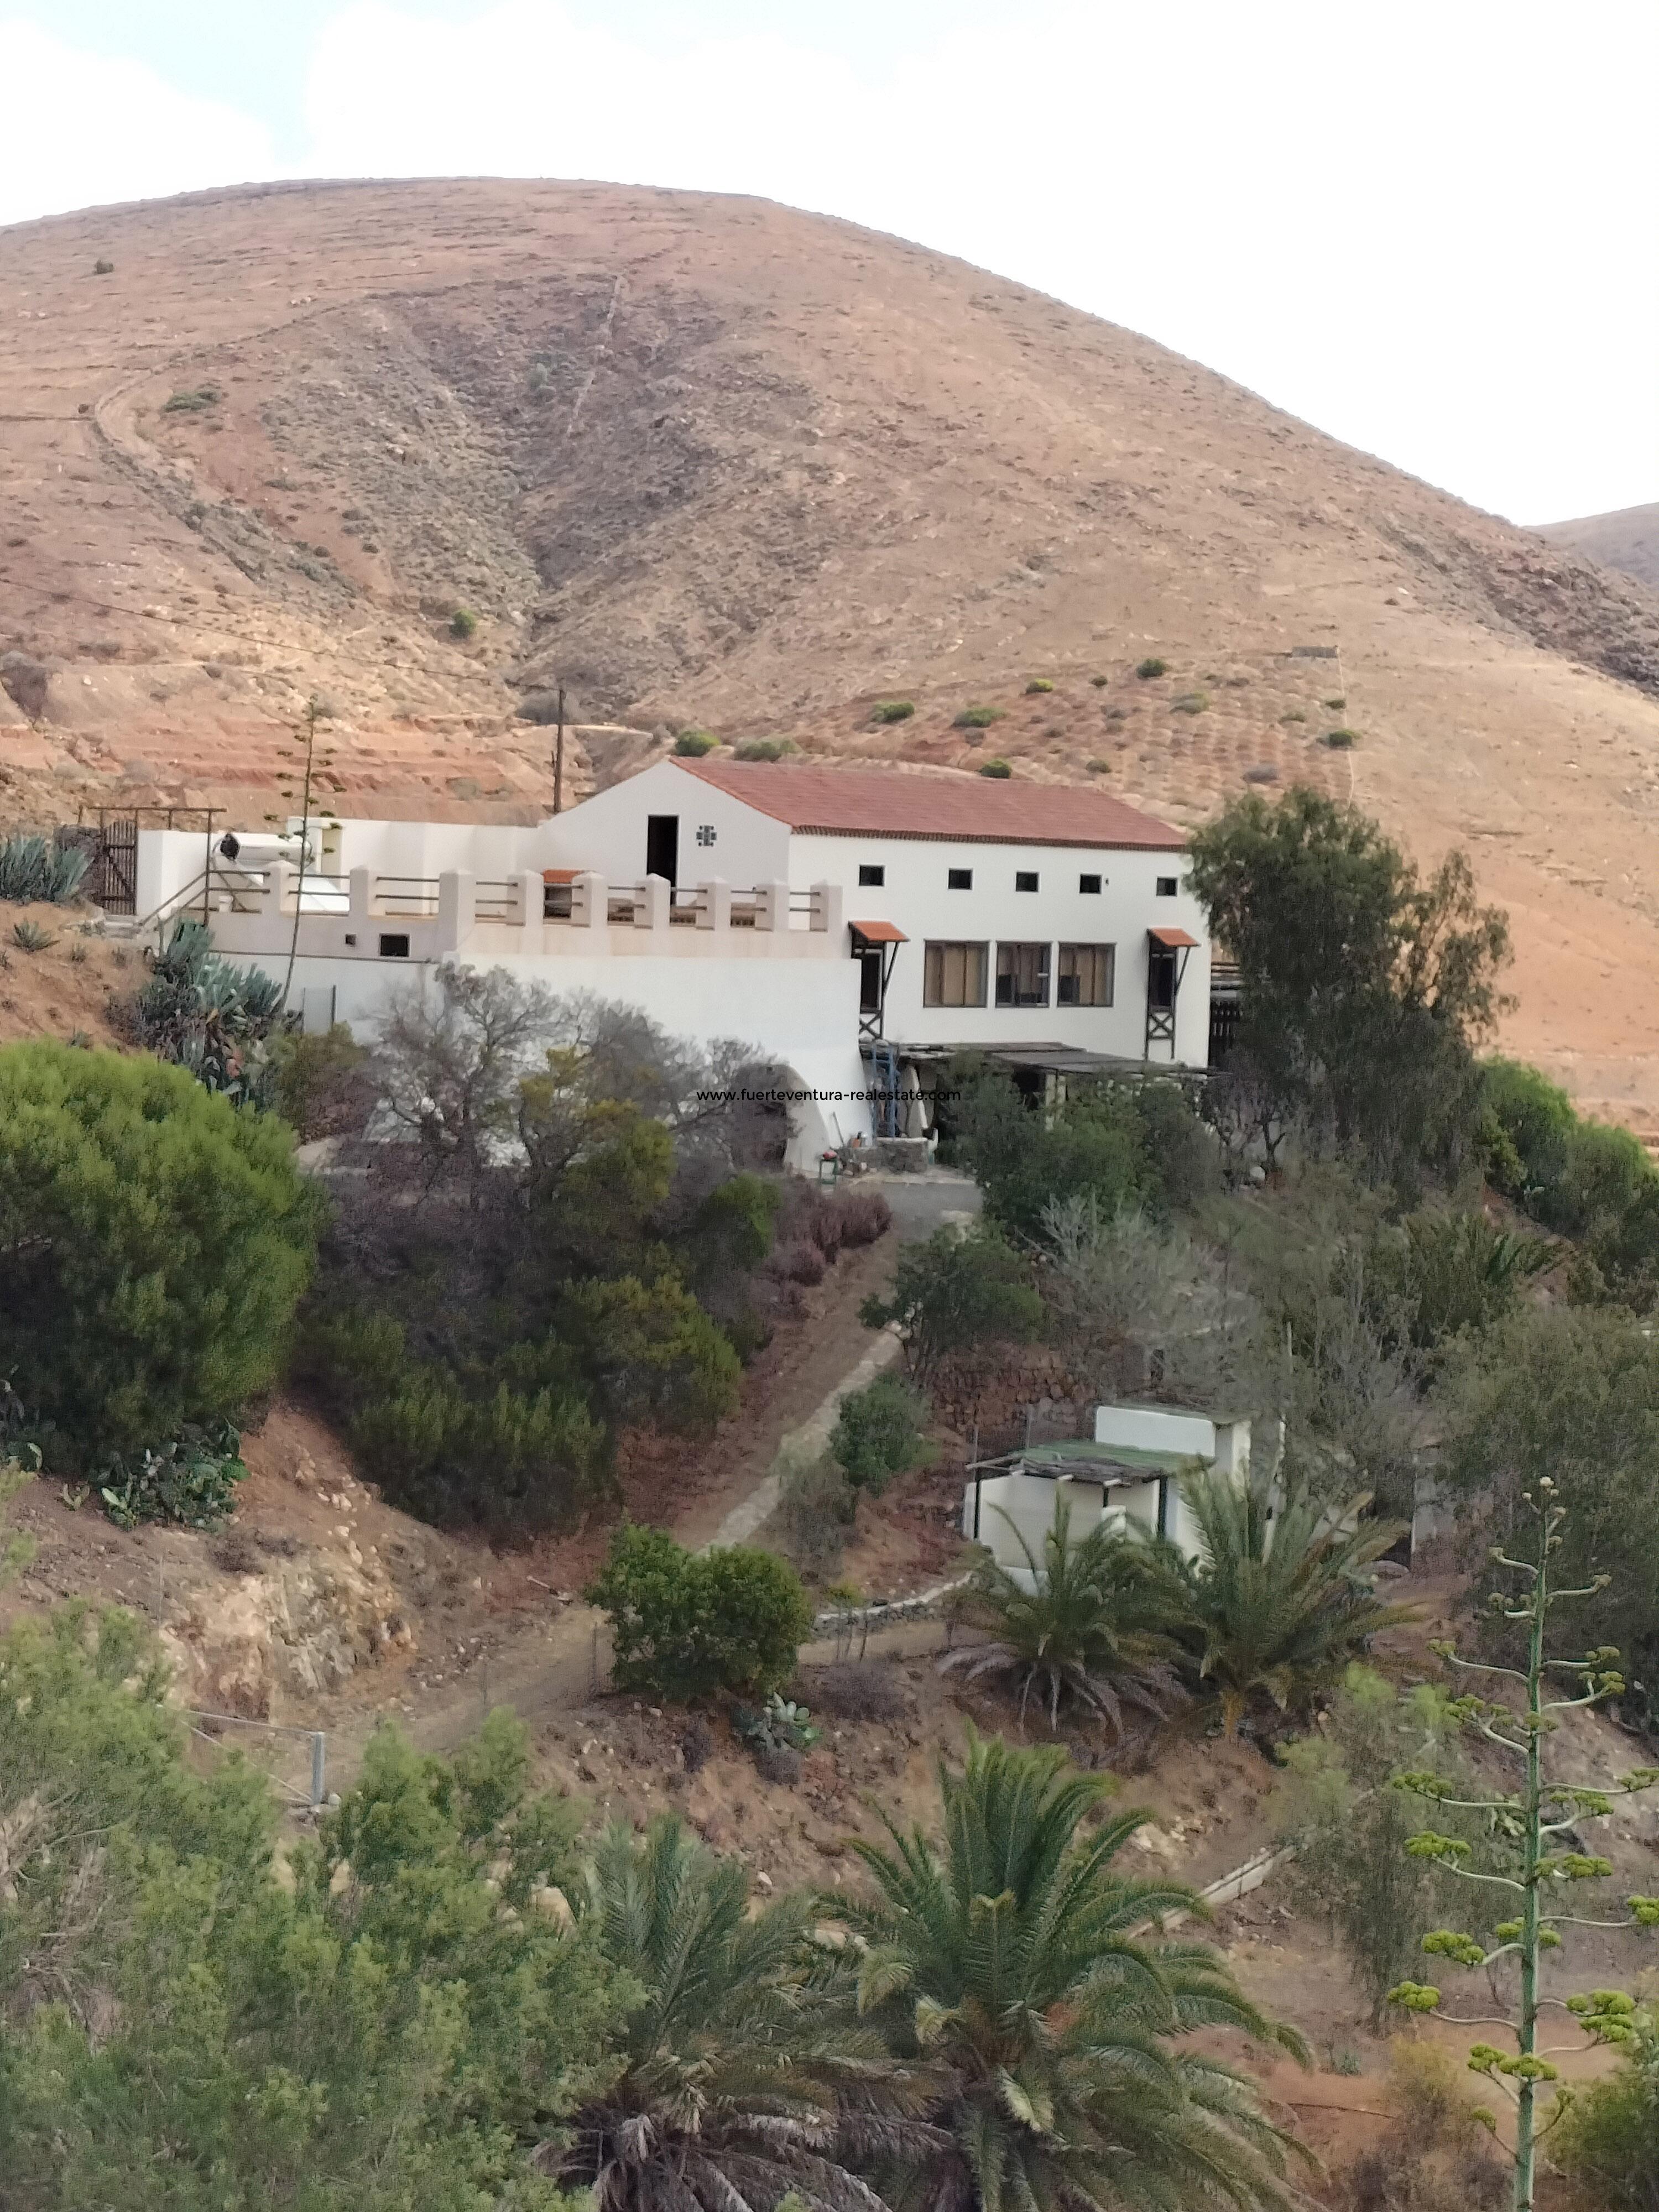 For sale! Very nice finca with 23,000 m2 of land in Fuerteventura.